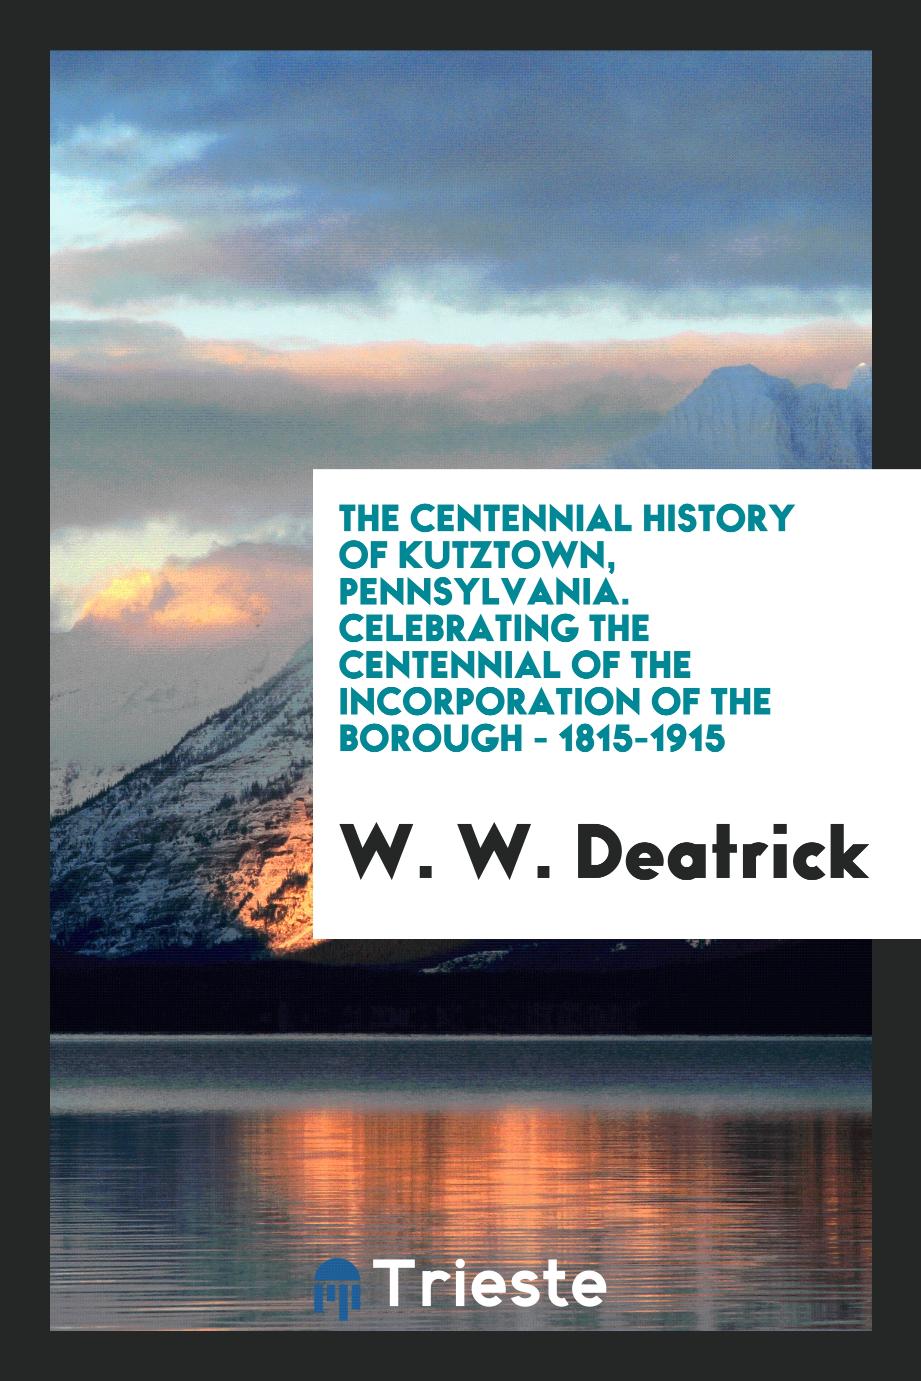 The Centennial History of Kutztown, Pennsylvania. Celebrating the Centennial of the Incorporation of the Borough - 1815-1915